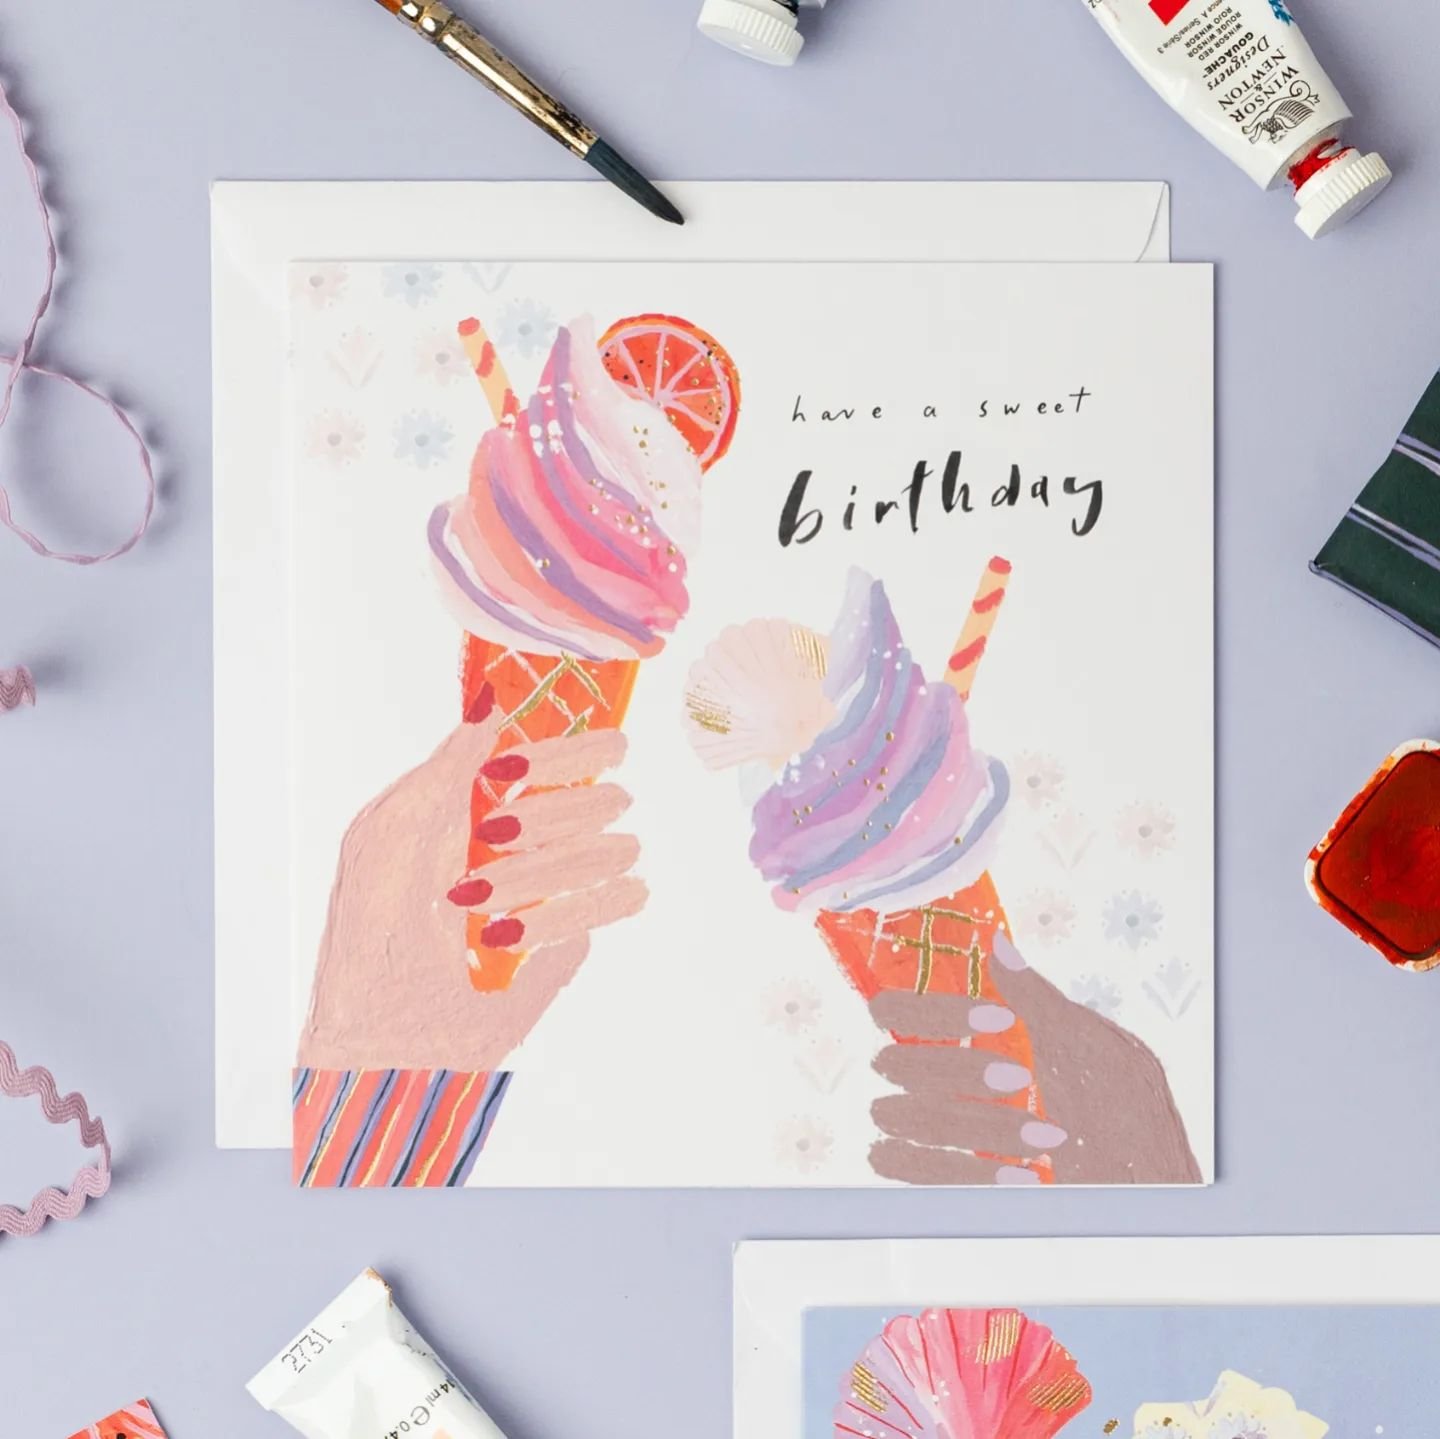 Finally it's ice-cream weather in the UK!! Shop our summery Sardinia designs today, ciao bella! 🍊
.
www.cbgtrader.co.uk
www.faire.com
.
📷 @hollyboothstudio 
.
#hotchpotchlondon #hotchpotchcards #hotchpotchpublishing #hotchpotch #cards #stationery #